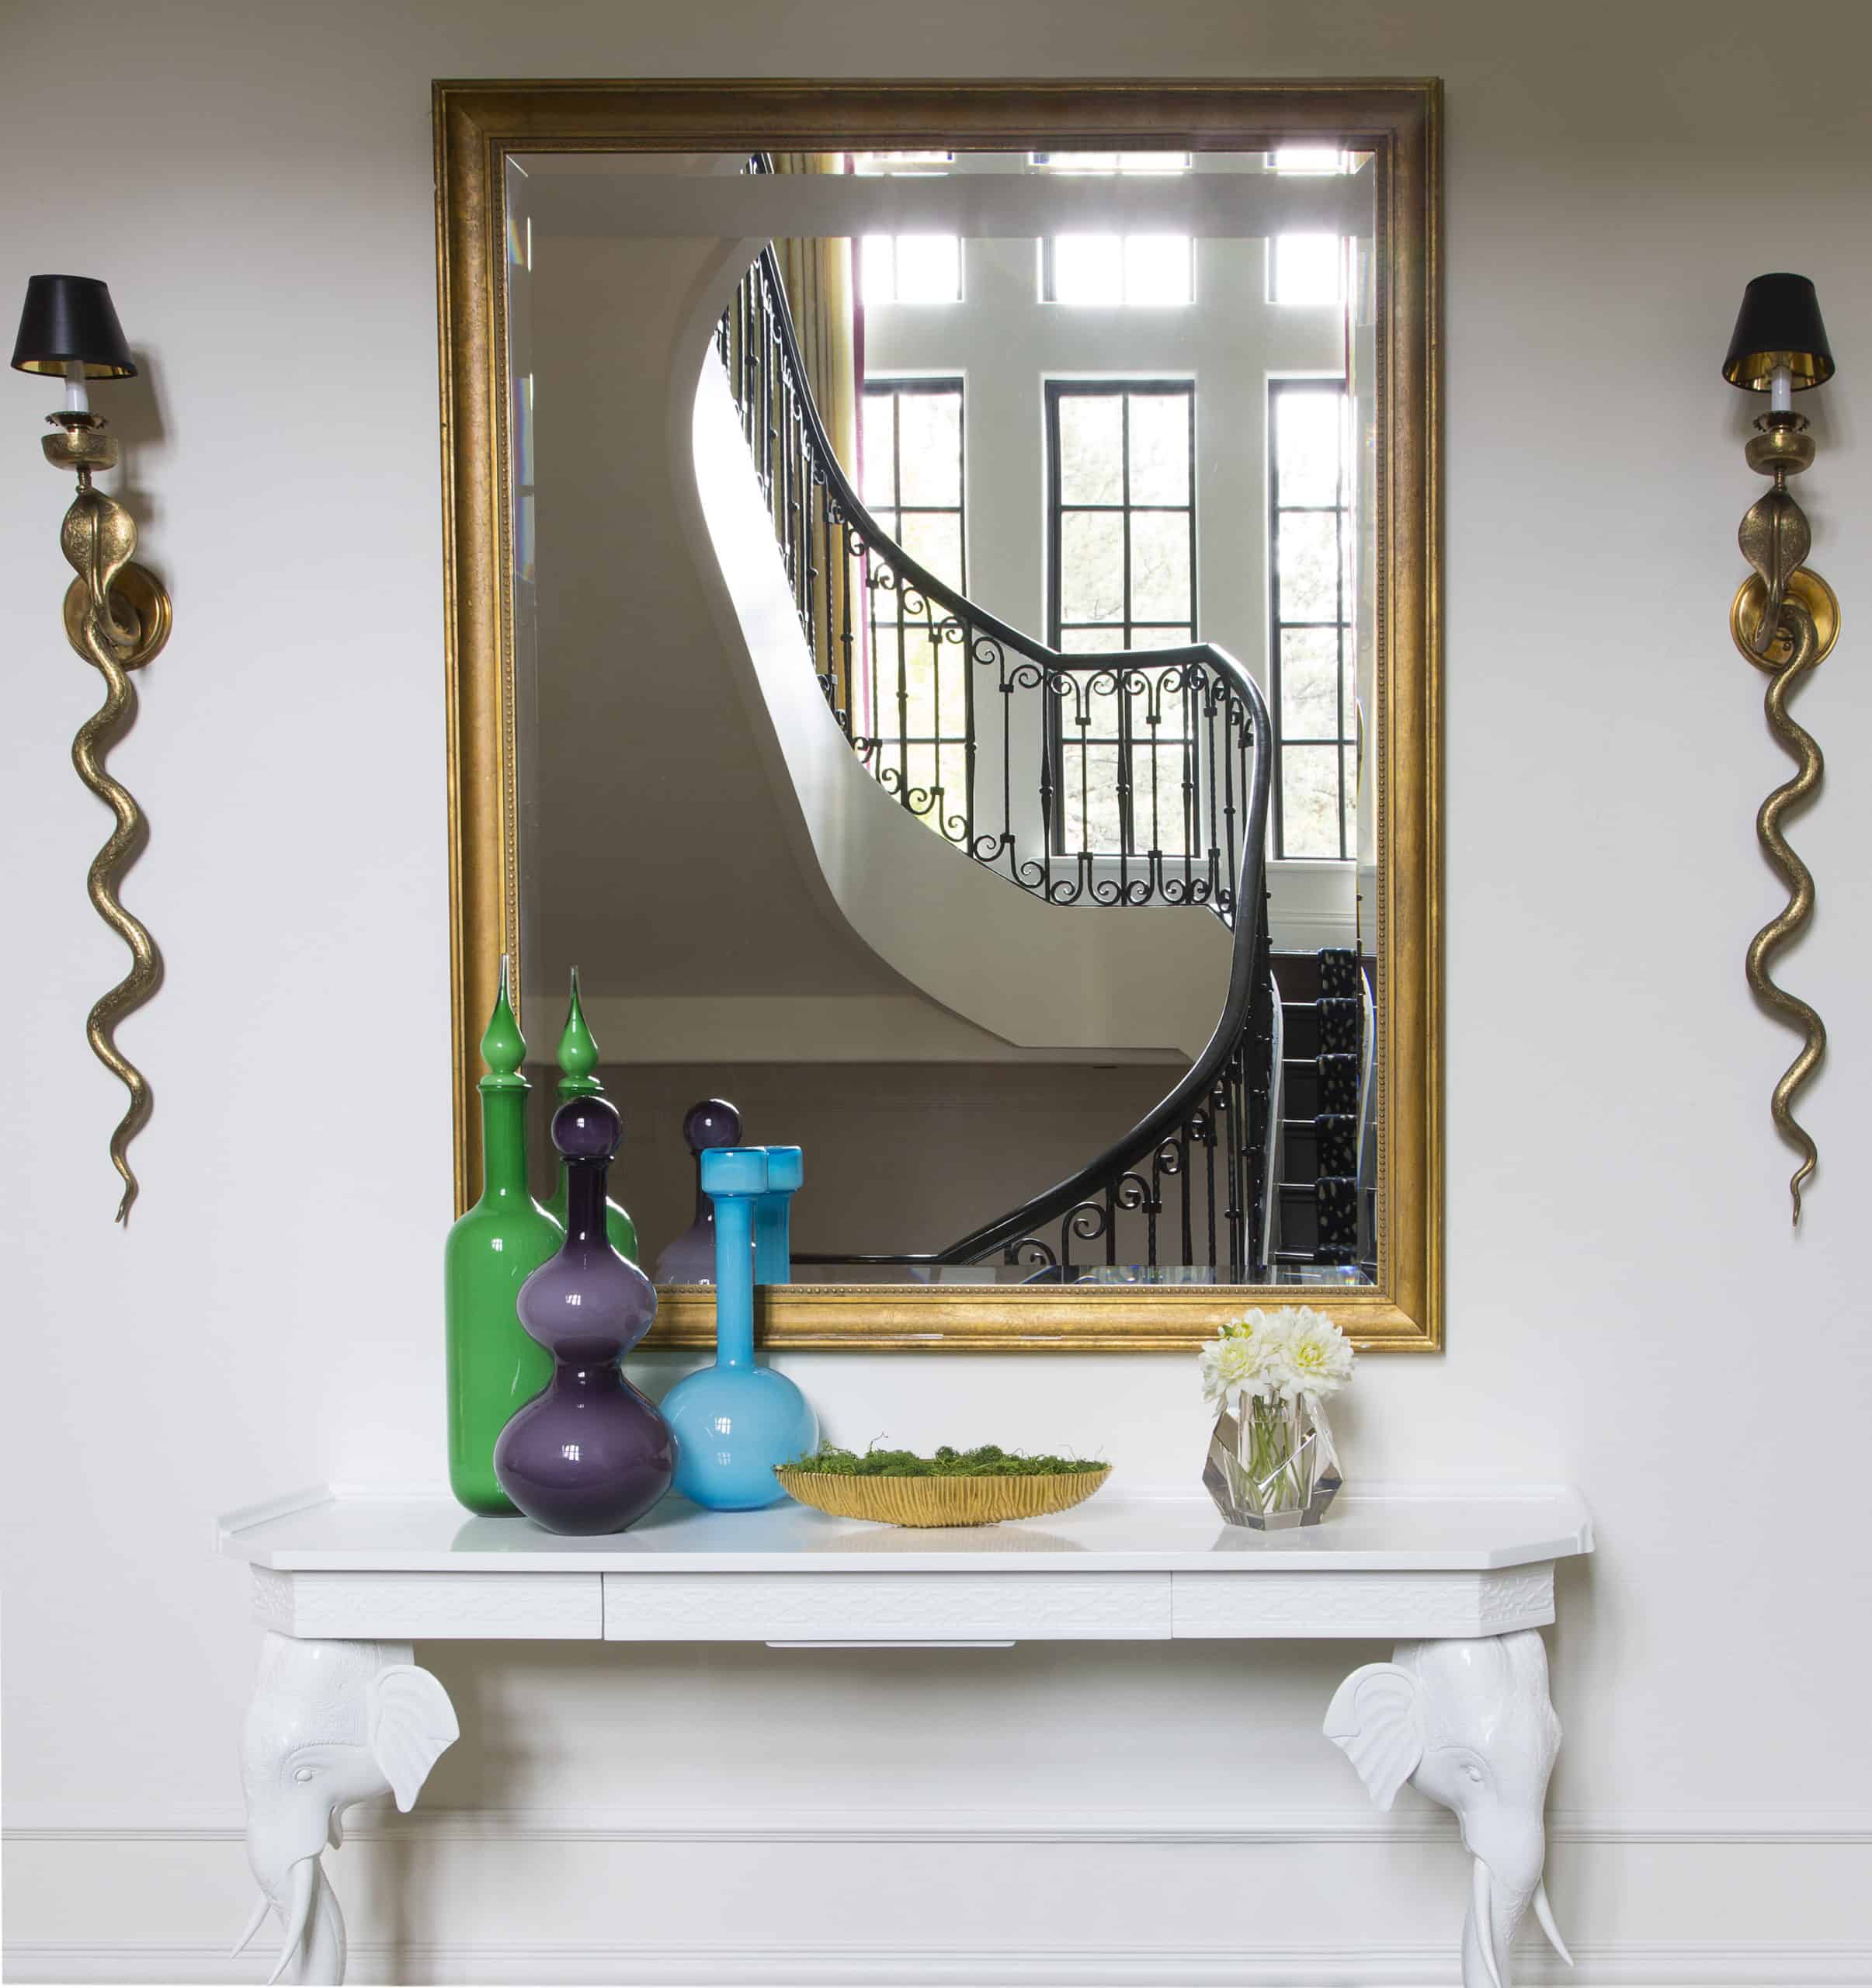 Fantastic home decor in entry with elephant console table and snake sconces